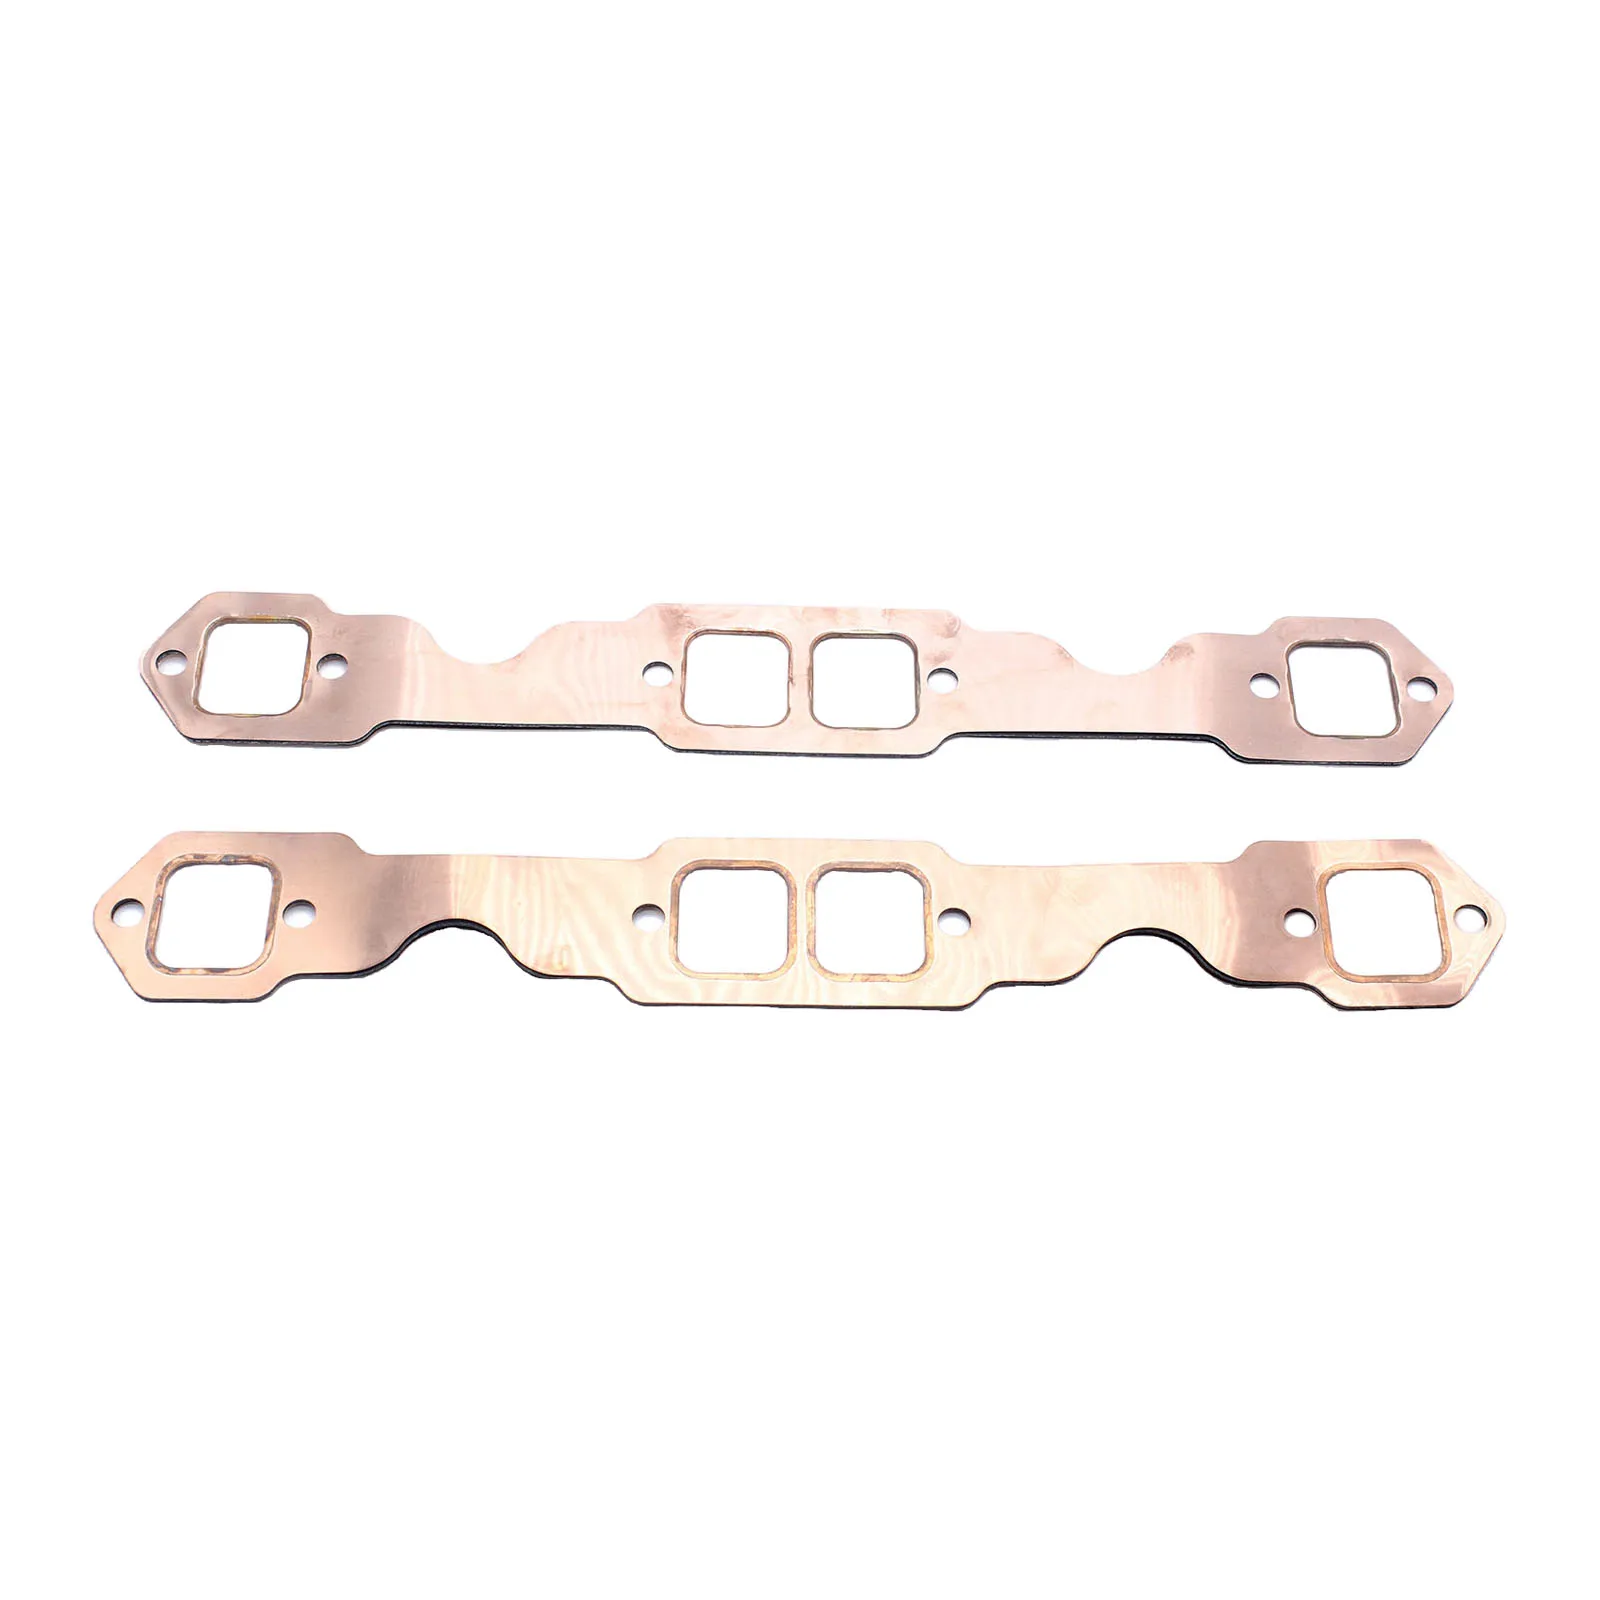 SBC Oval Port Copper Header Exhaust Gasket Seal For Chevy SB 327 305 350 383 Exhaust Manifold Gasket Set